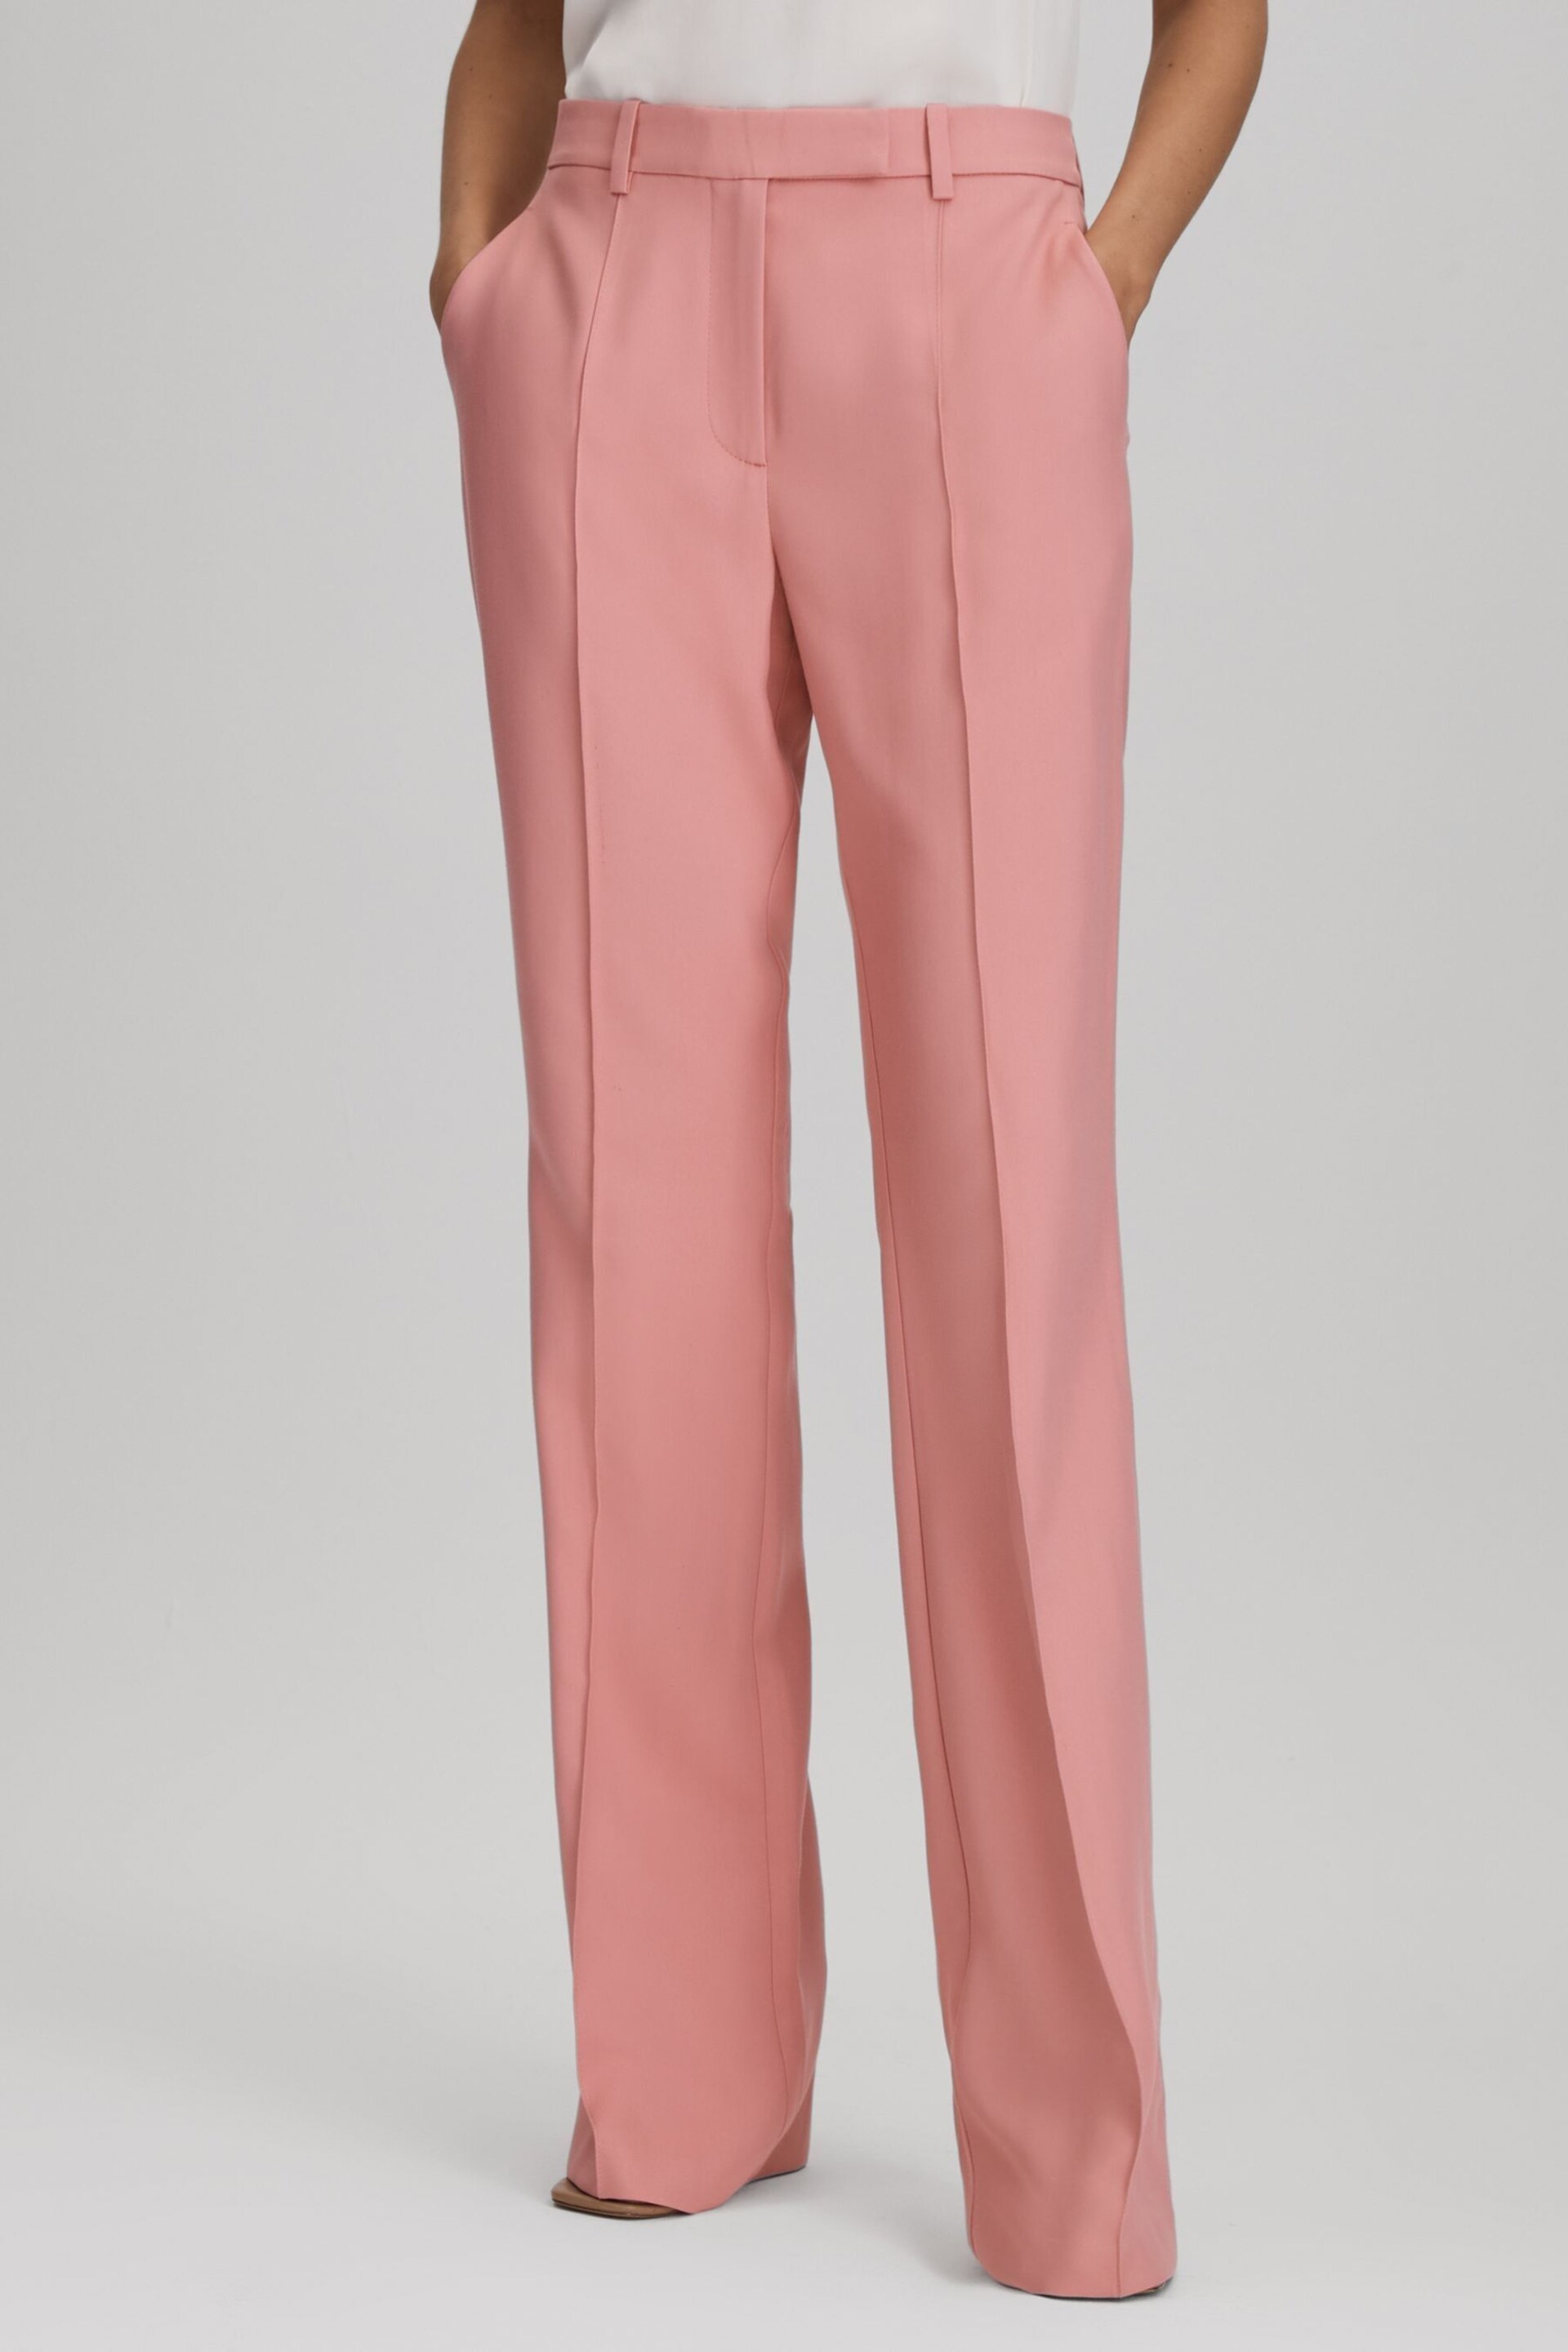 Reiss Pink Millie Flared Suit Trousers - Image 1 of 6